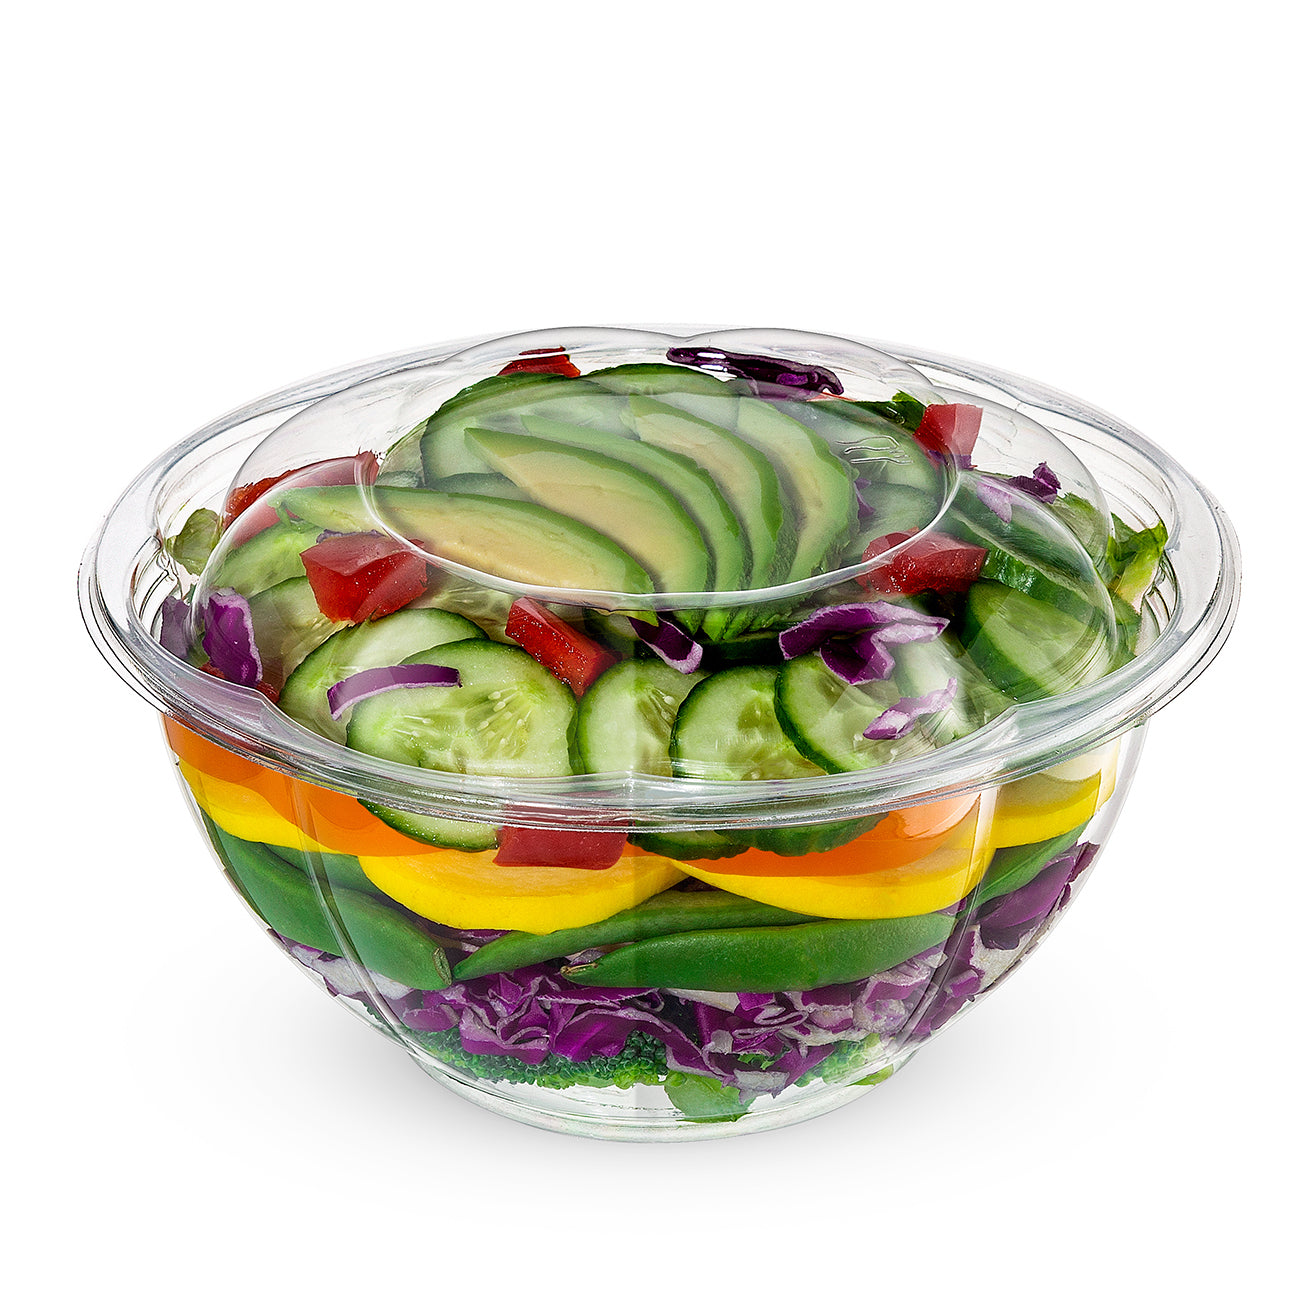 32oz Salad Bowls To-Go with Lids (300 Count) - Clear Plastic Disposable  Salad Containers | Airtight, Lunch, Salads, Parfait, Fruits, Leak Proof